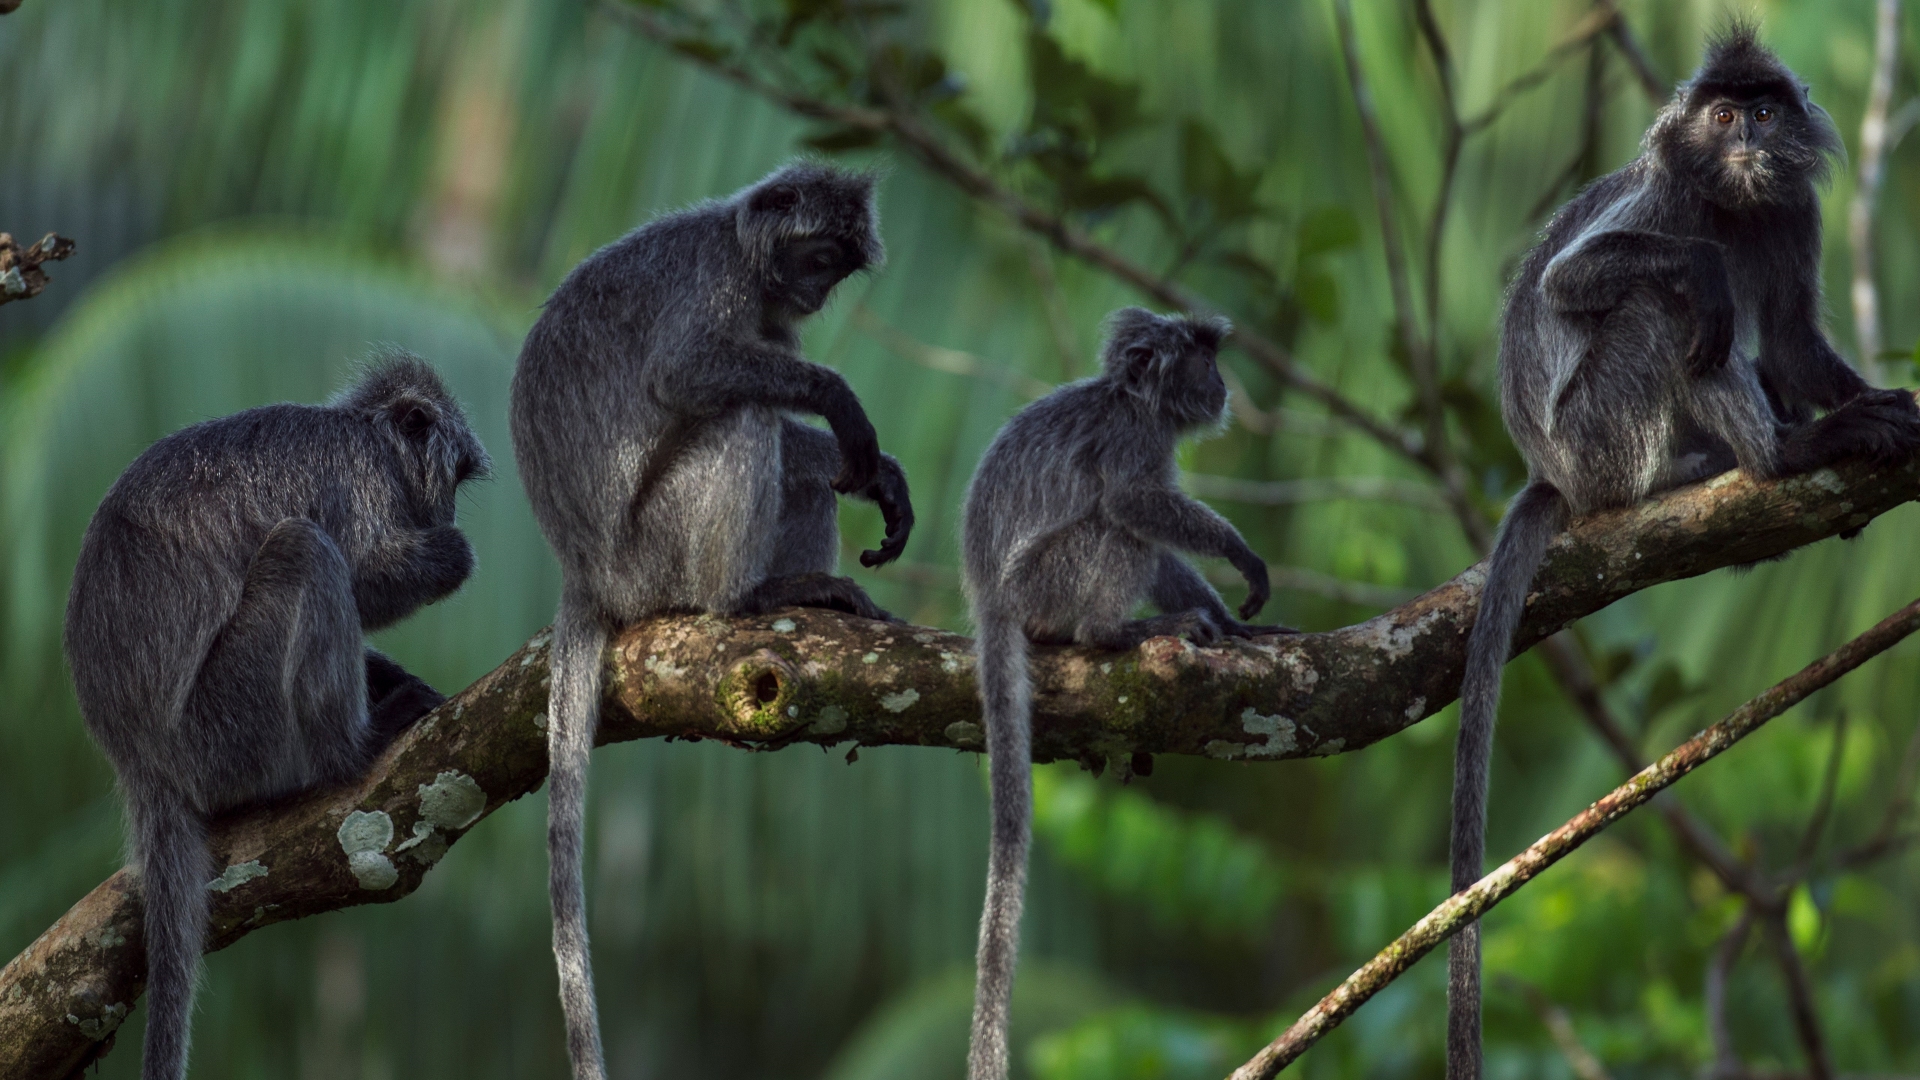 A group of silvery langurs, also known as silvery lutungs, sitting on a branch in Borneo.